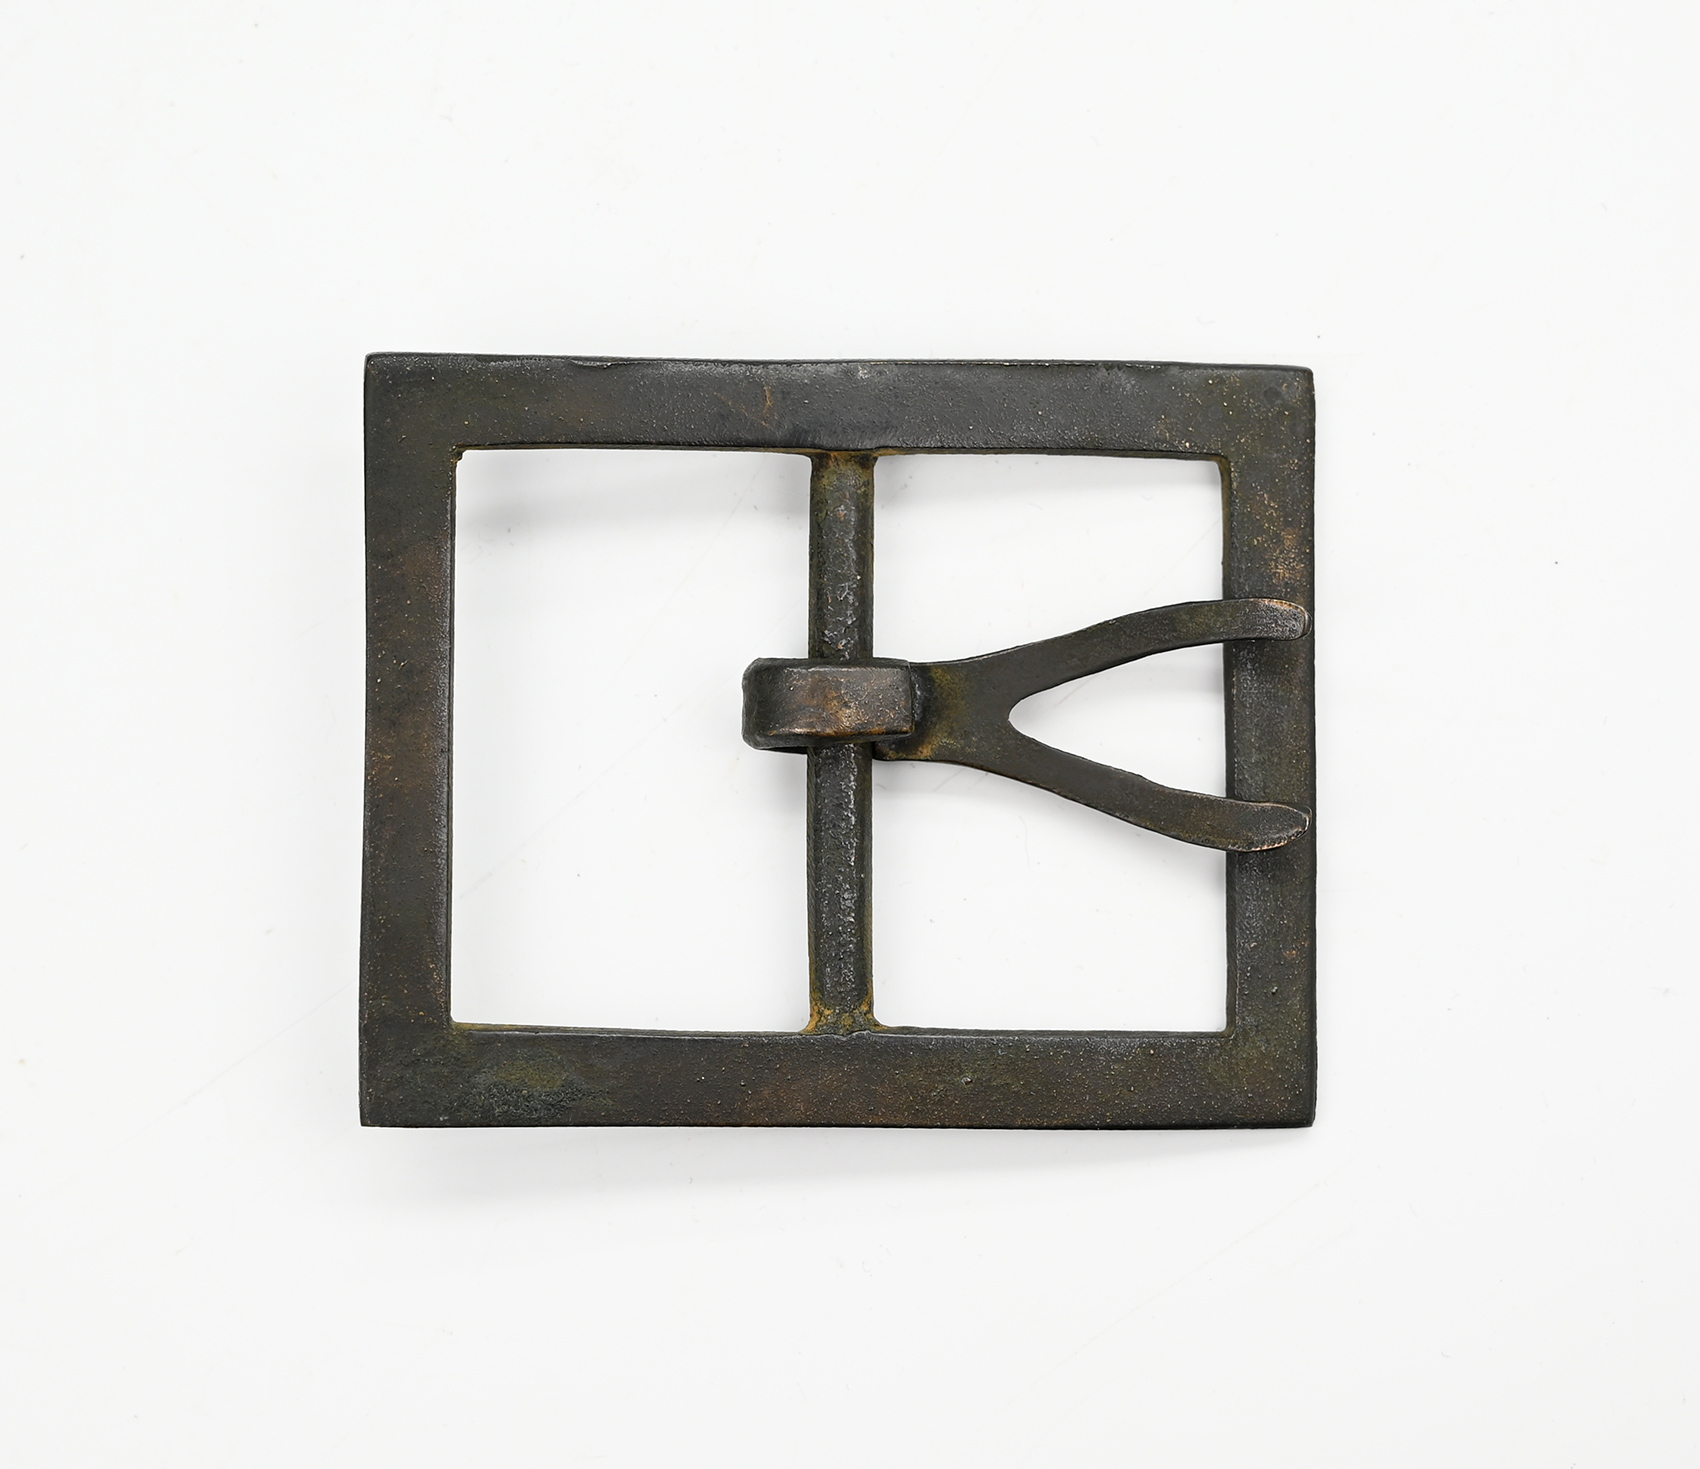 CONFEDERATE MOVABLE TONGUE, WISHBONE FRAME BUCKLE — Horse Soldier